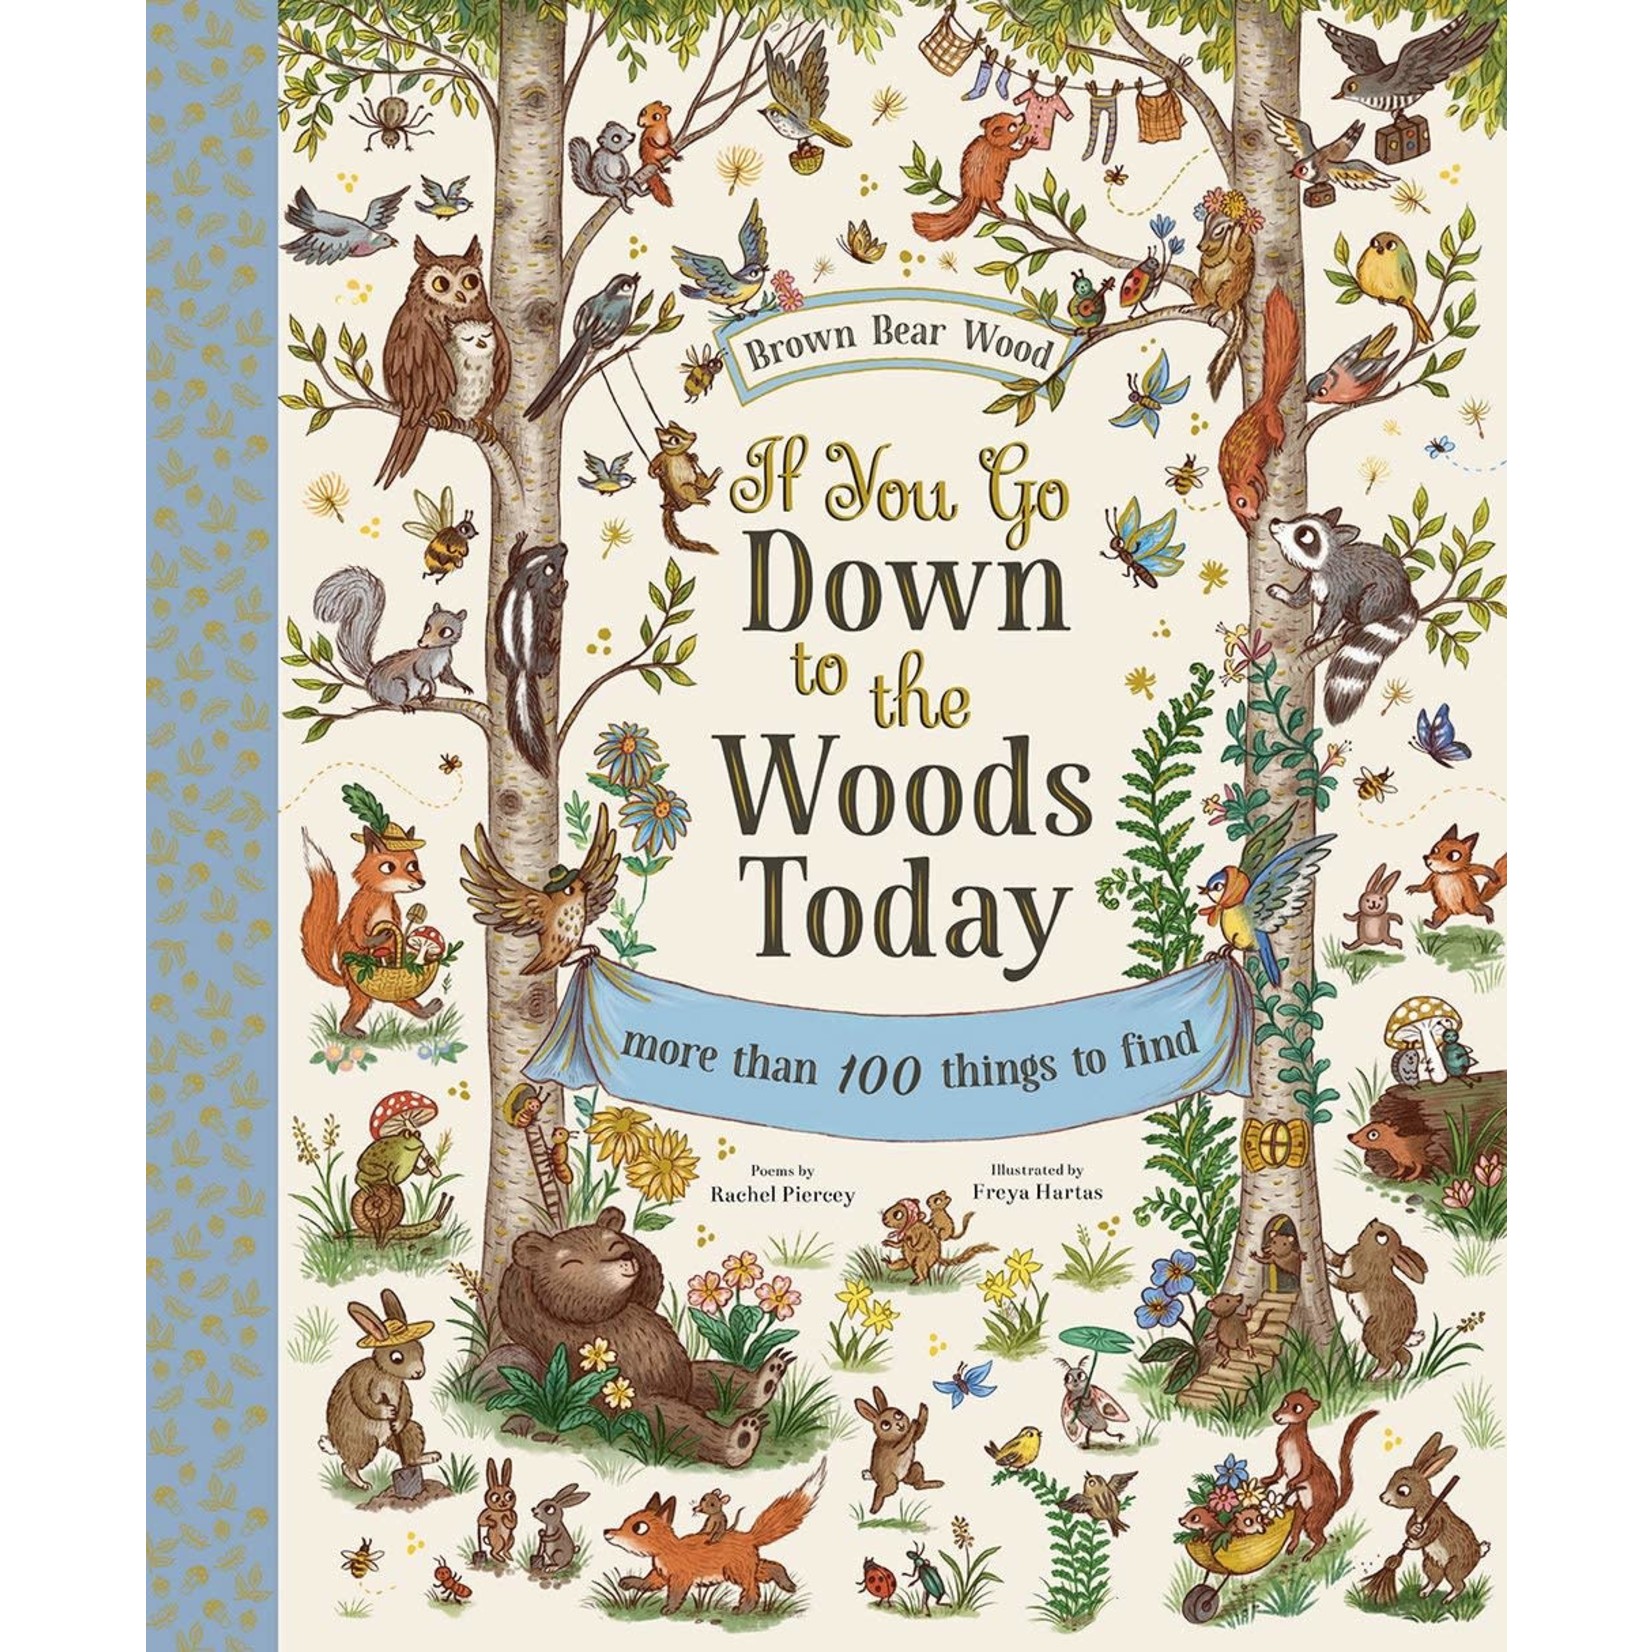 If You Go Down to the Woods Today by Rachel Piercey (Hardcover)